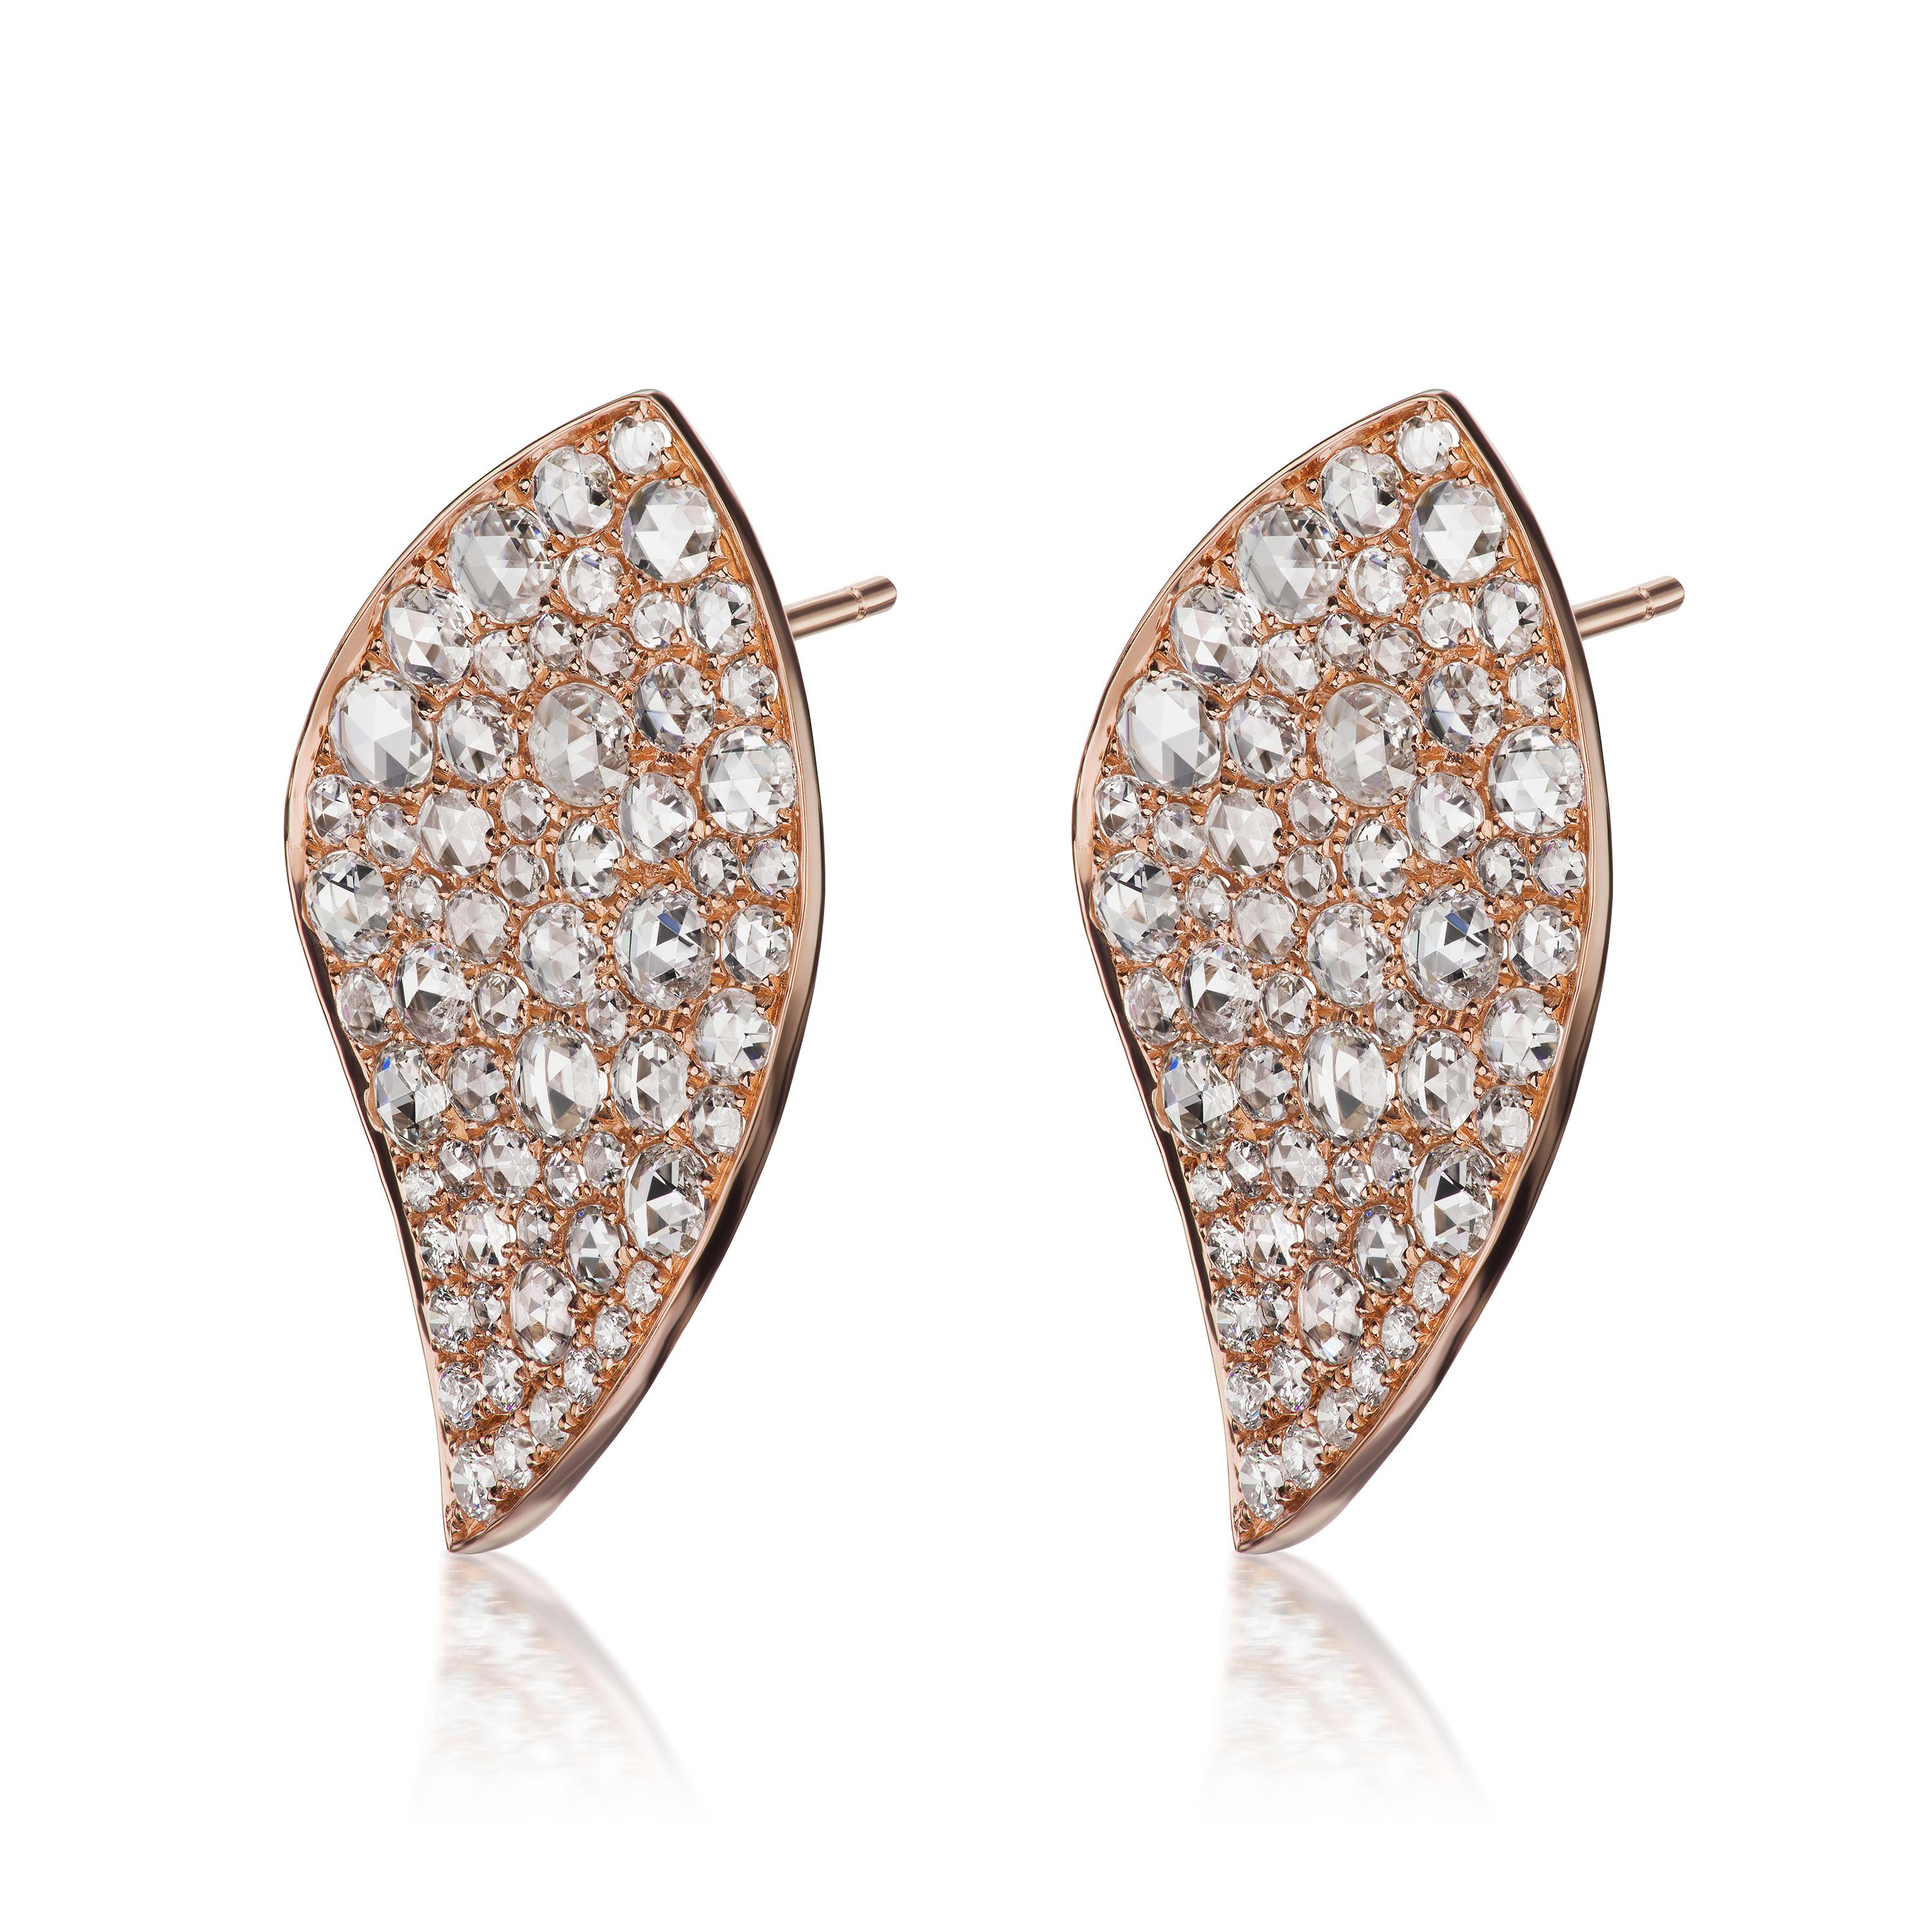 This 18 Karat rose gold  diamond stud earring in elegant frame is embellished with diamonds. Each pair is made with 18 round diamonds and 108 rose cut diamonds. They come with gold posts and clutch backs.

JEWELRY SPECIFICATION:
Approx. Metal